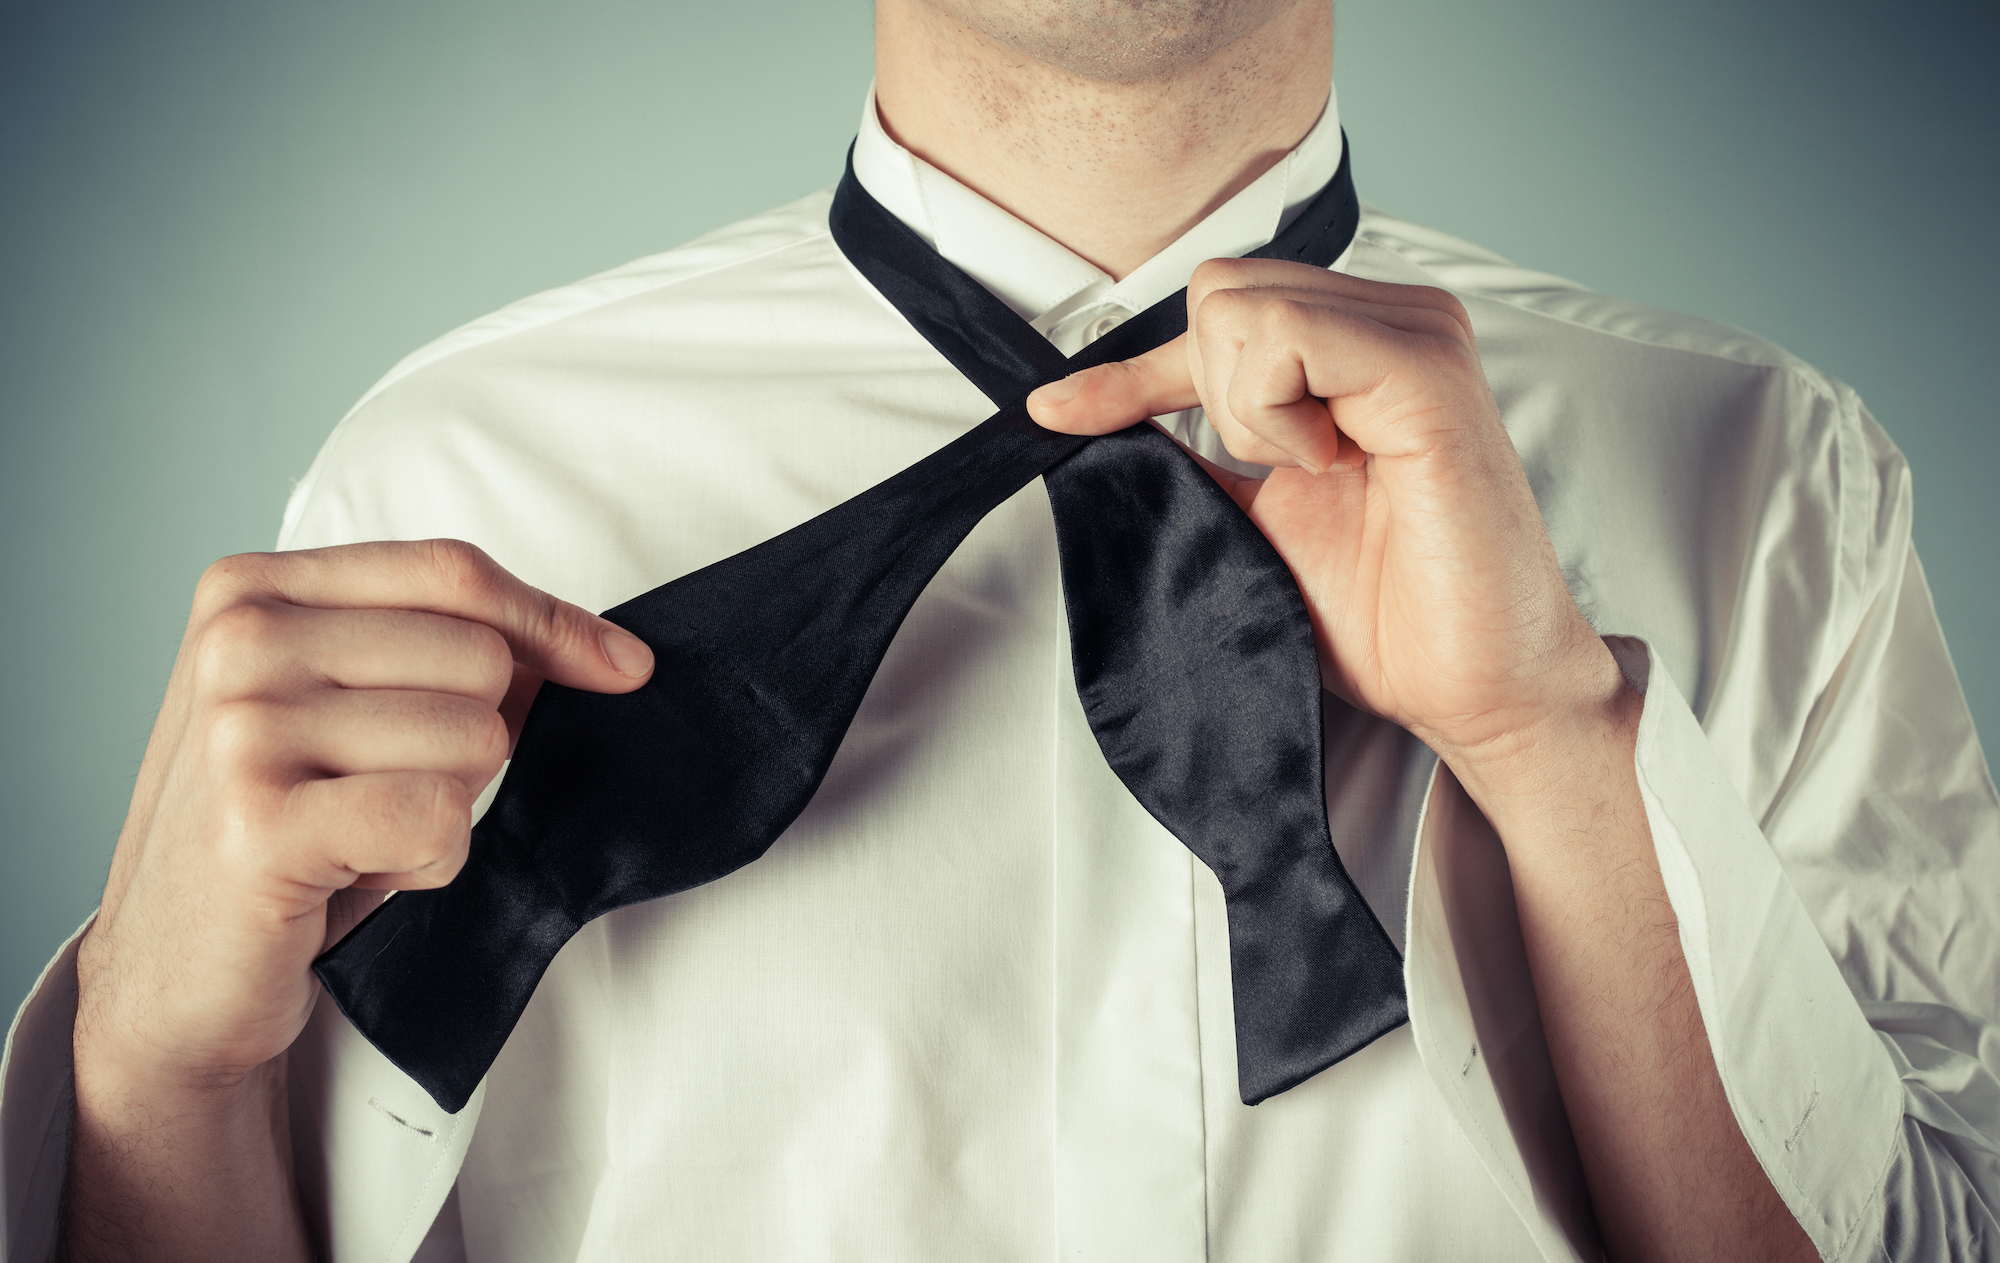 How to tie a bow tie: thread the long end over the short end